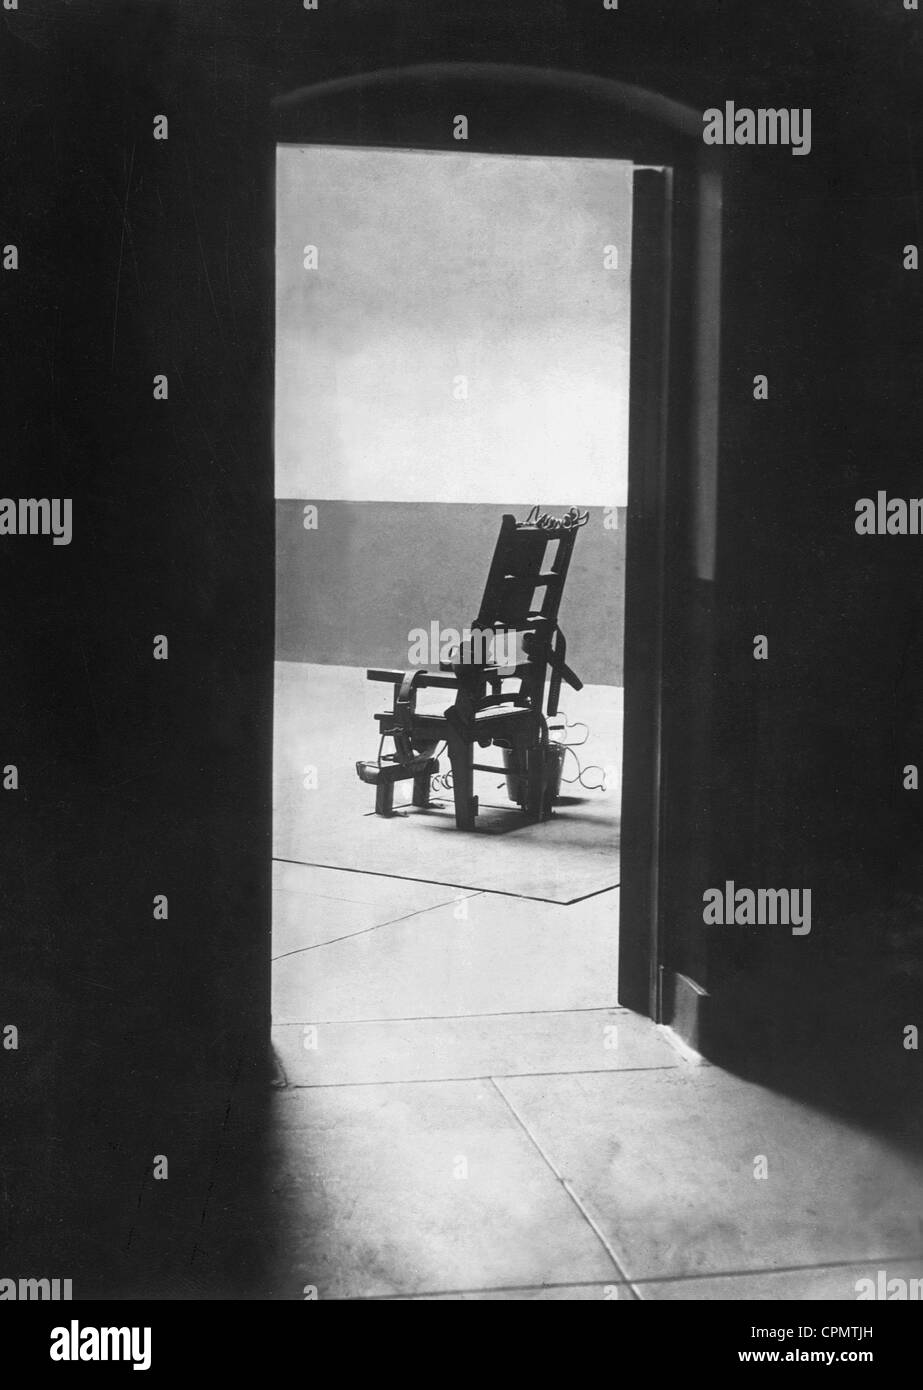 Electric chair Black and White Stock Photos & Images - Alamy